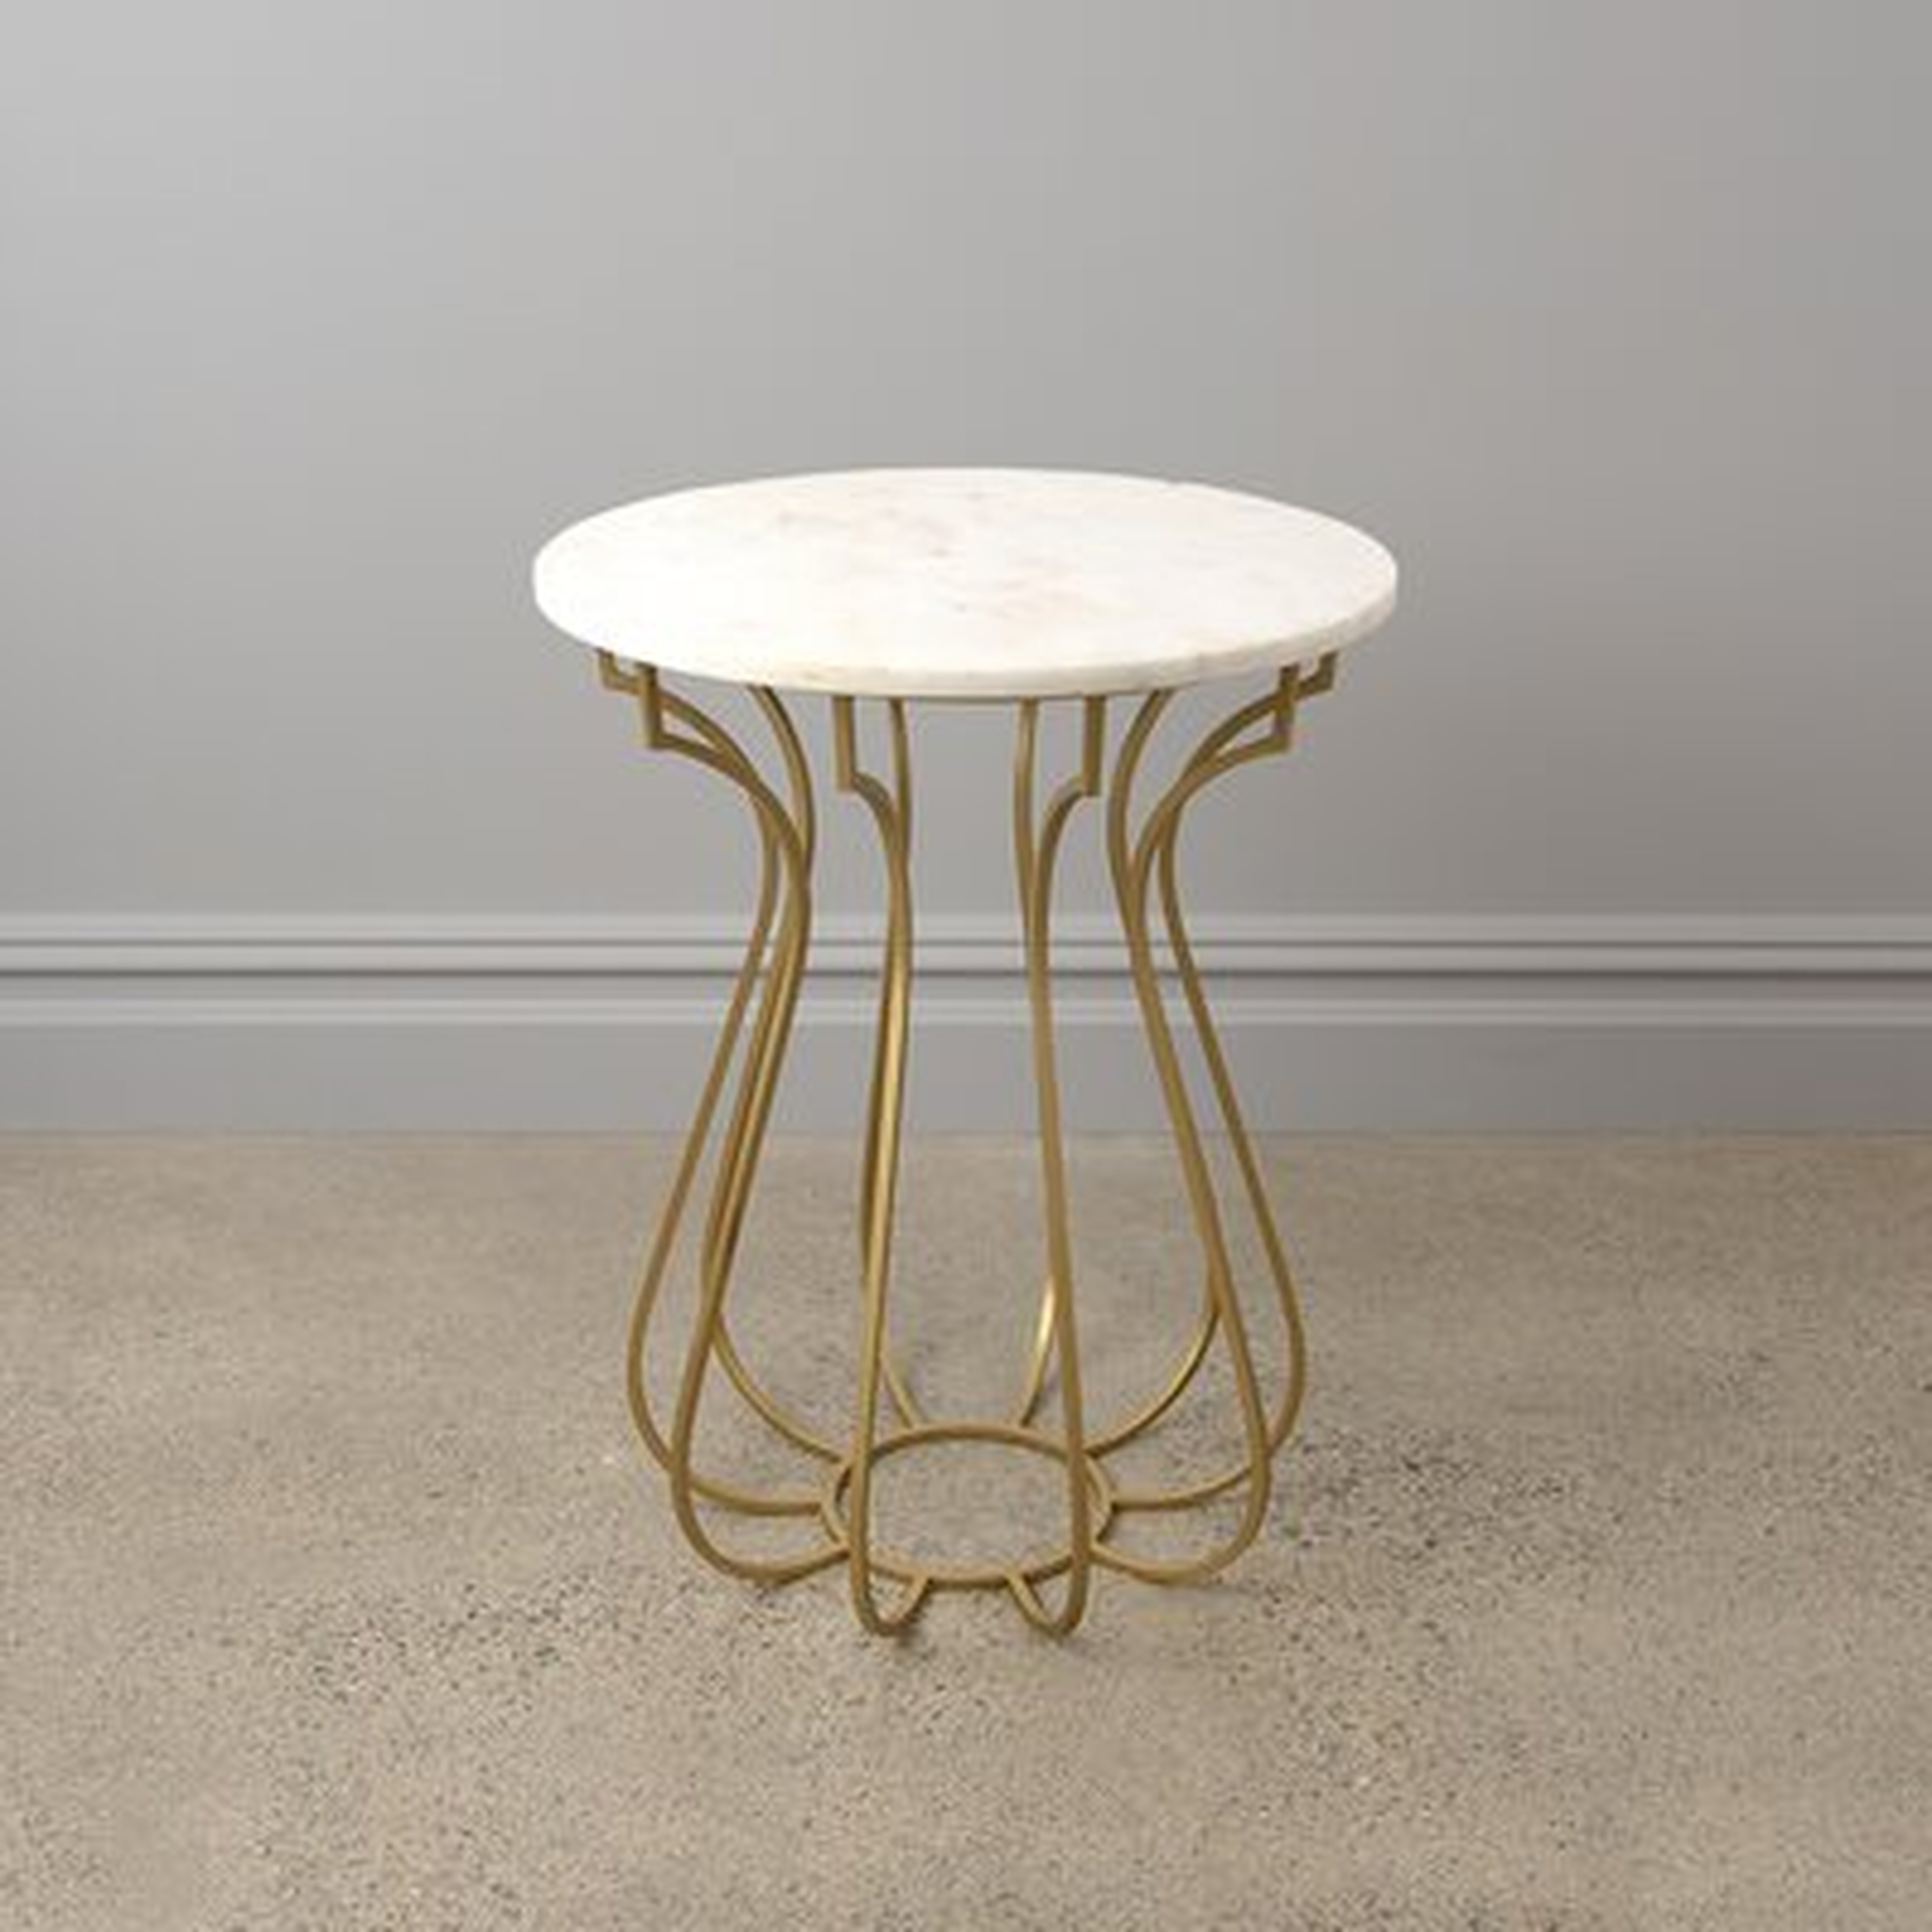 Northtrop Round Marble Side Table With Curved Metal Base - Wayfair